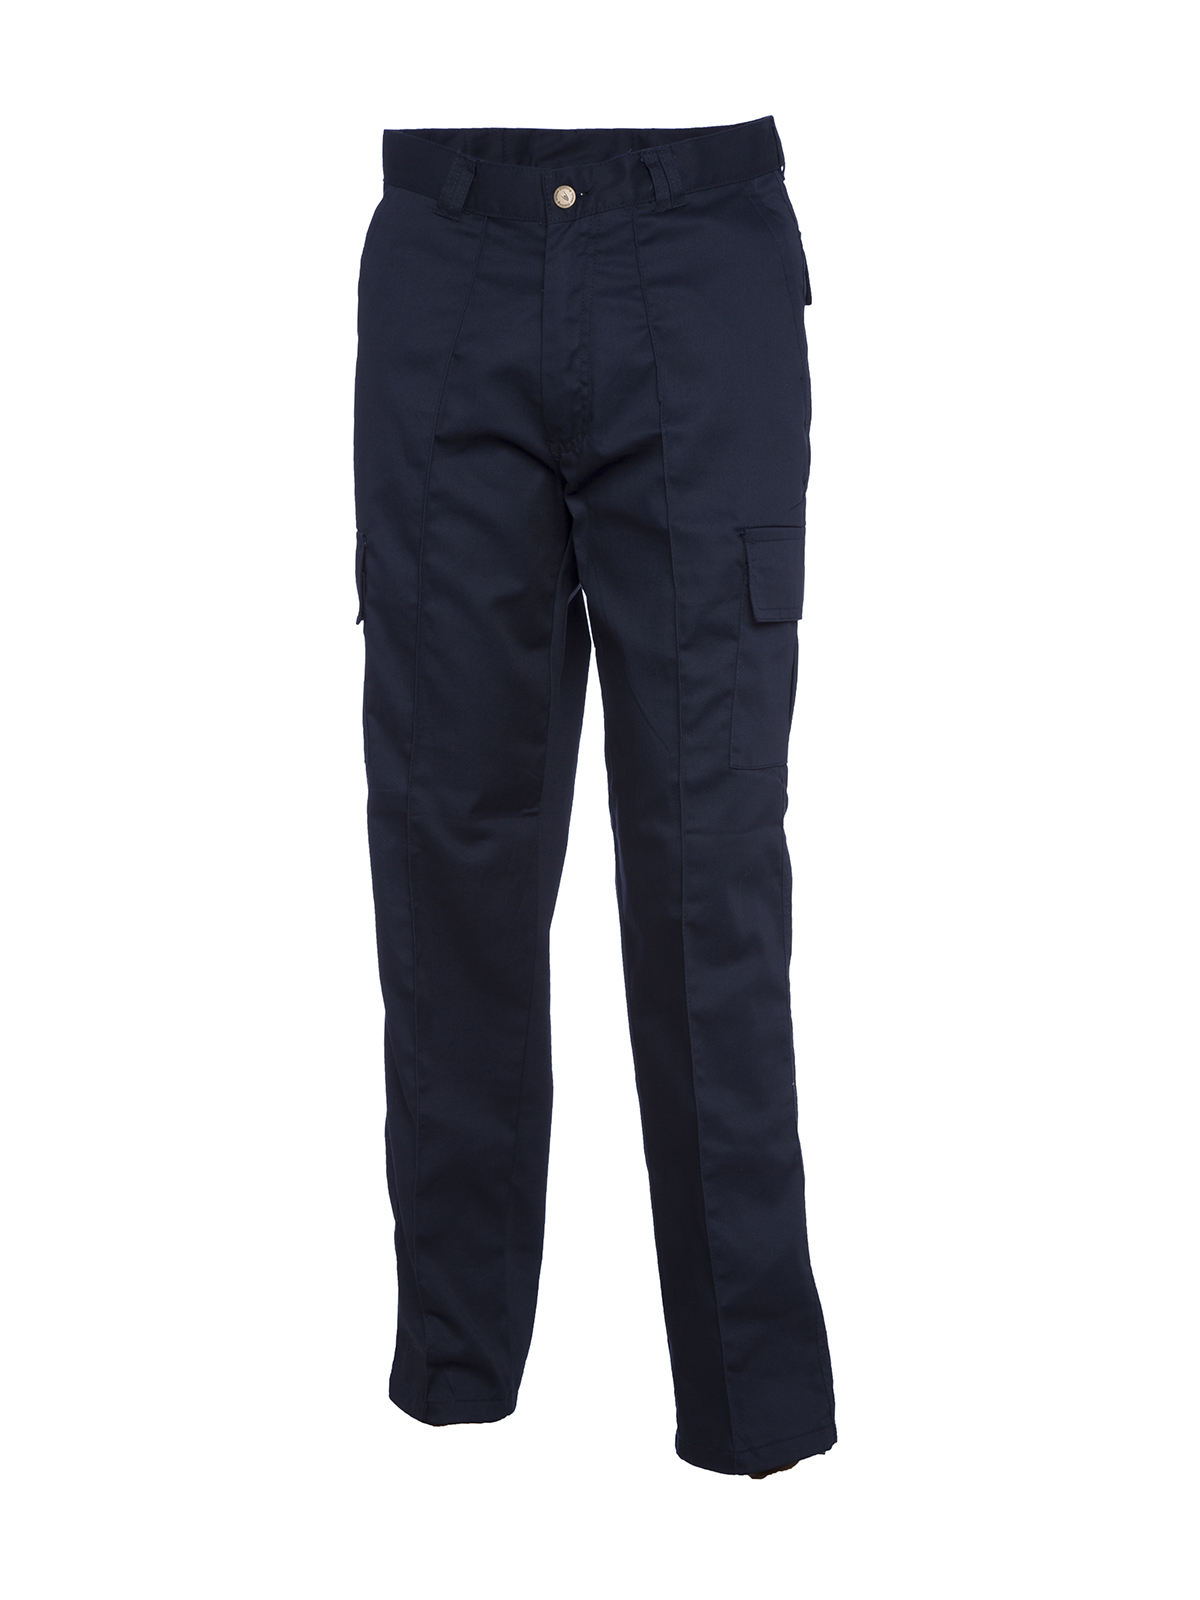 Cargo Trousers, Navy Blue - 46L